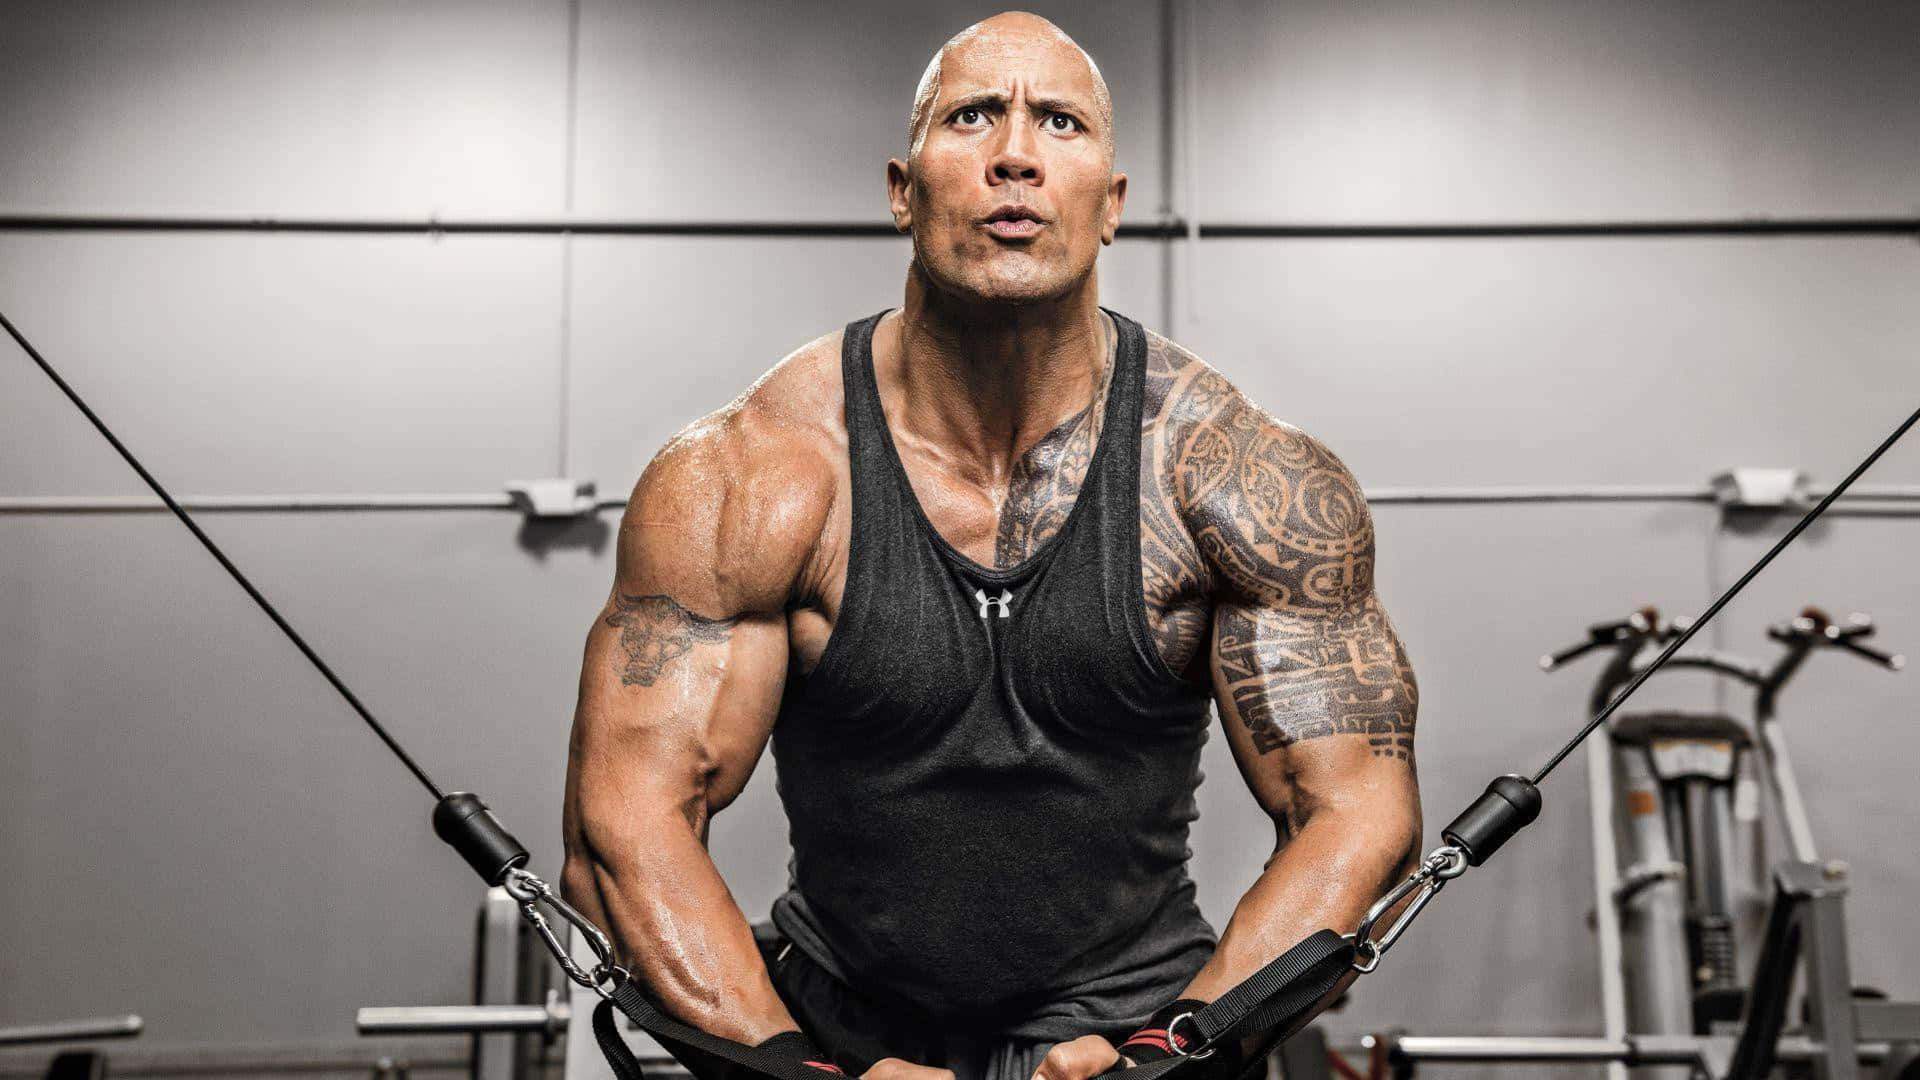 The Rock Is Doing A Pull Up In The Gym